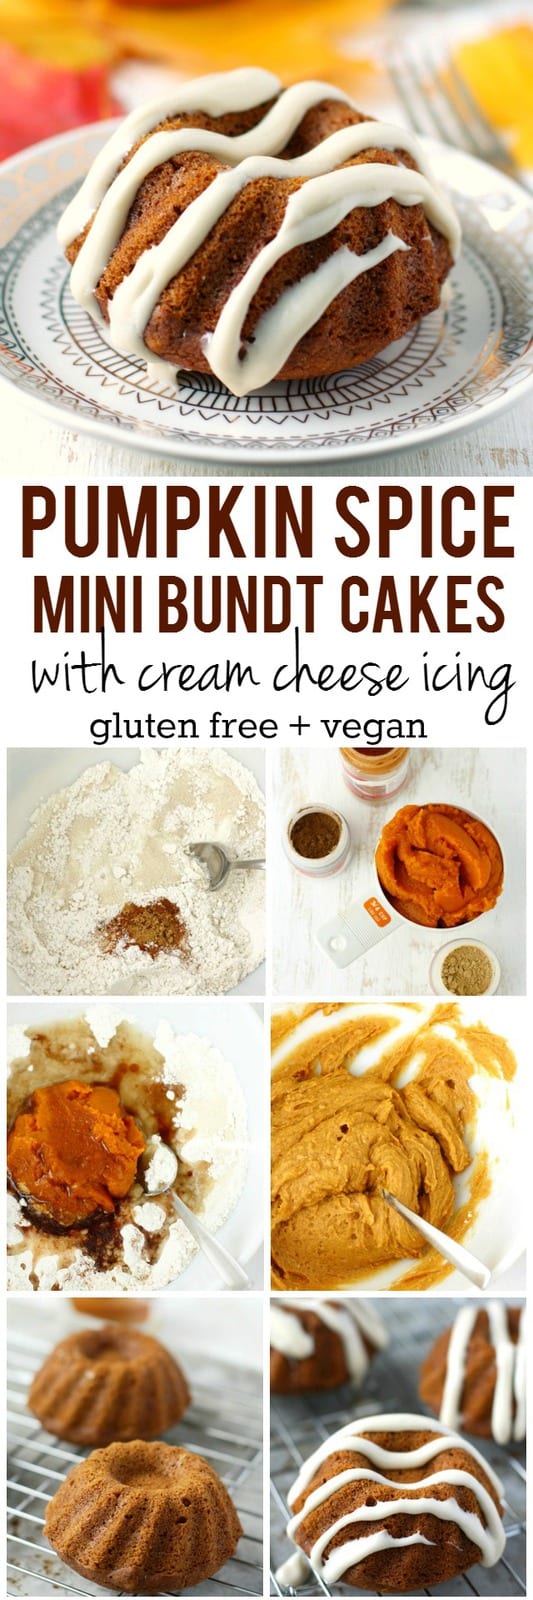 These pumpkin spice mini bundt cakes are so delicious - the sweet cream cheese glaze is the perfect finishing touch! These are perfect for Thanksgiving! #vegan #glutenfree AD #shop